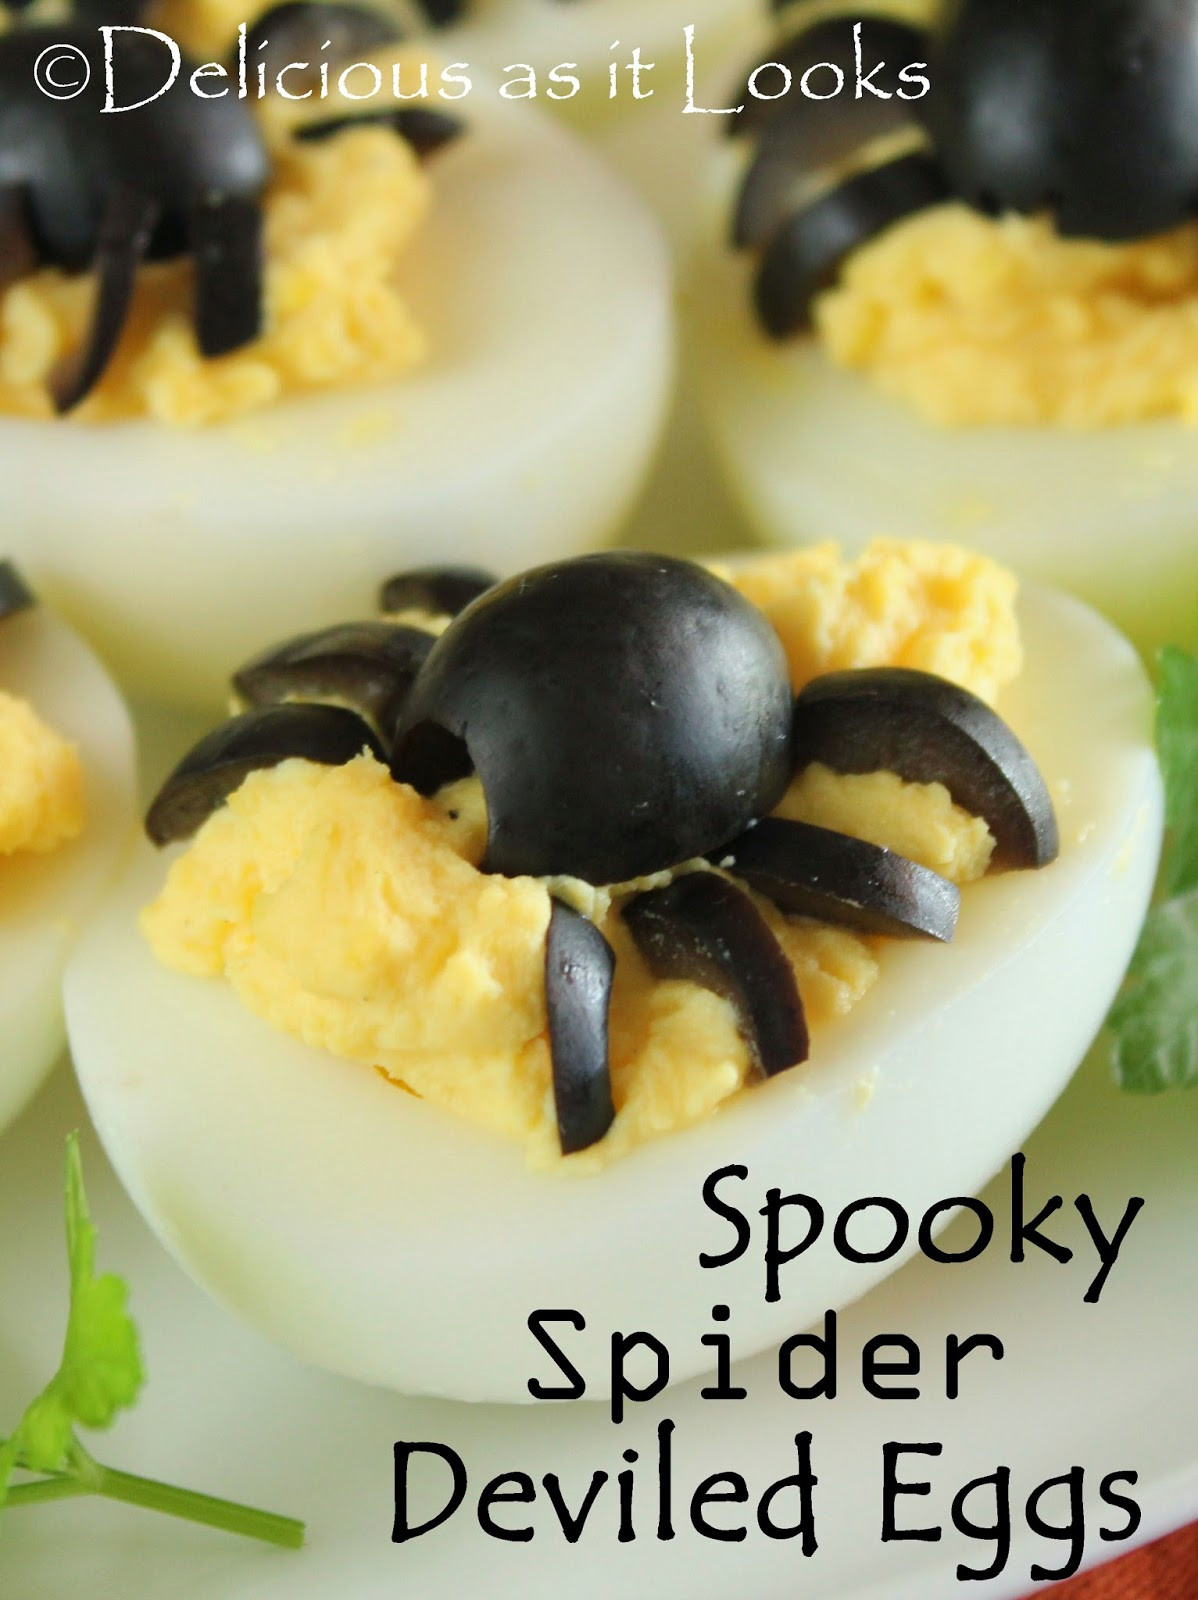 Halloween Deviled Eggs Spider
 Delicious as it Looks Halloween Spooky Spider Deviled Eggs